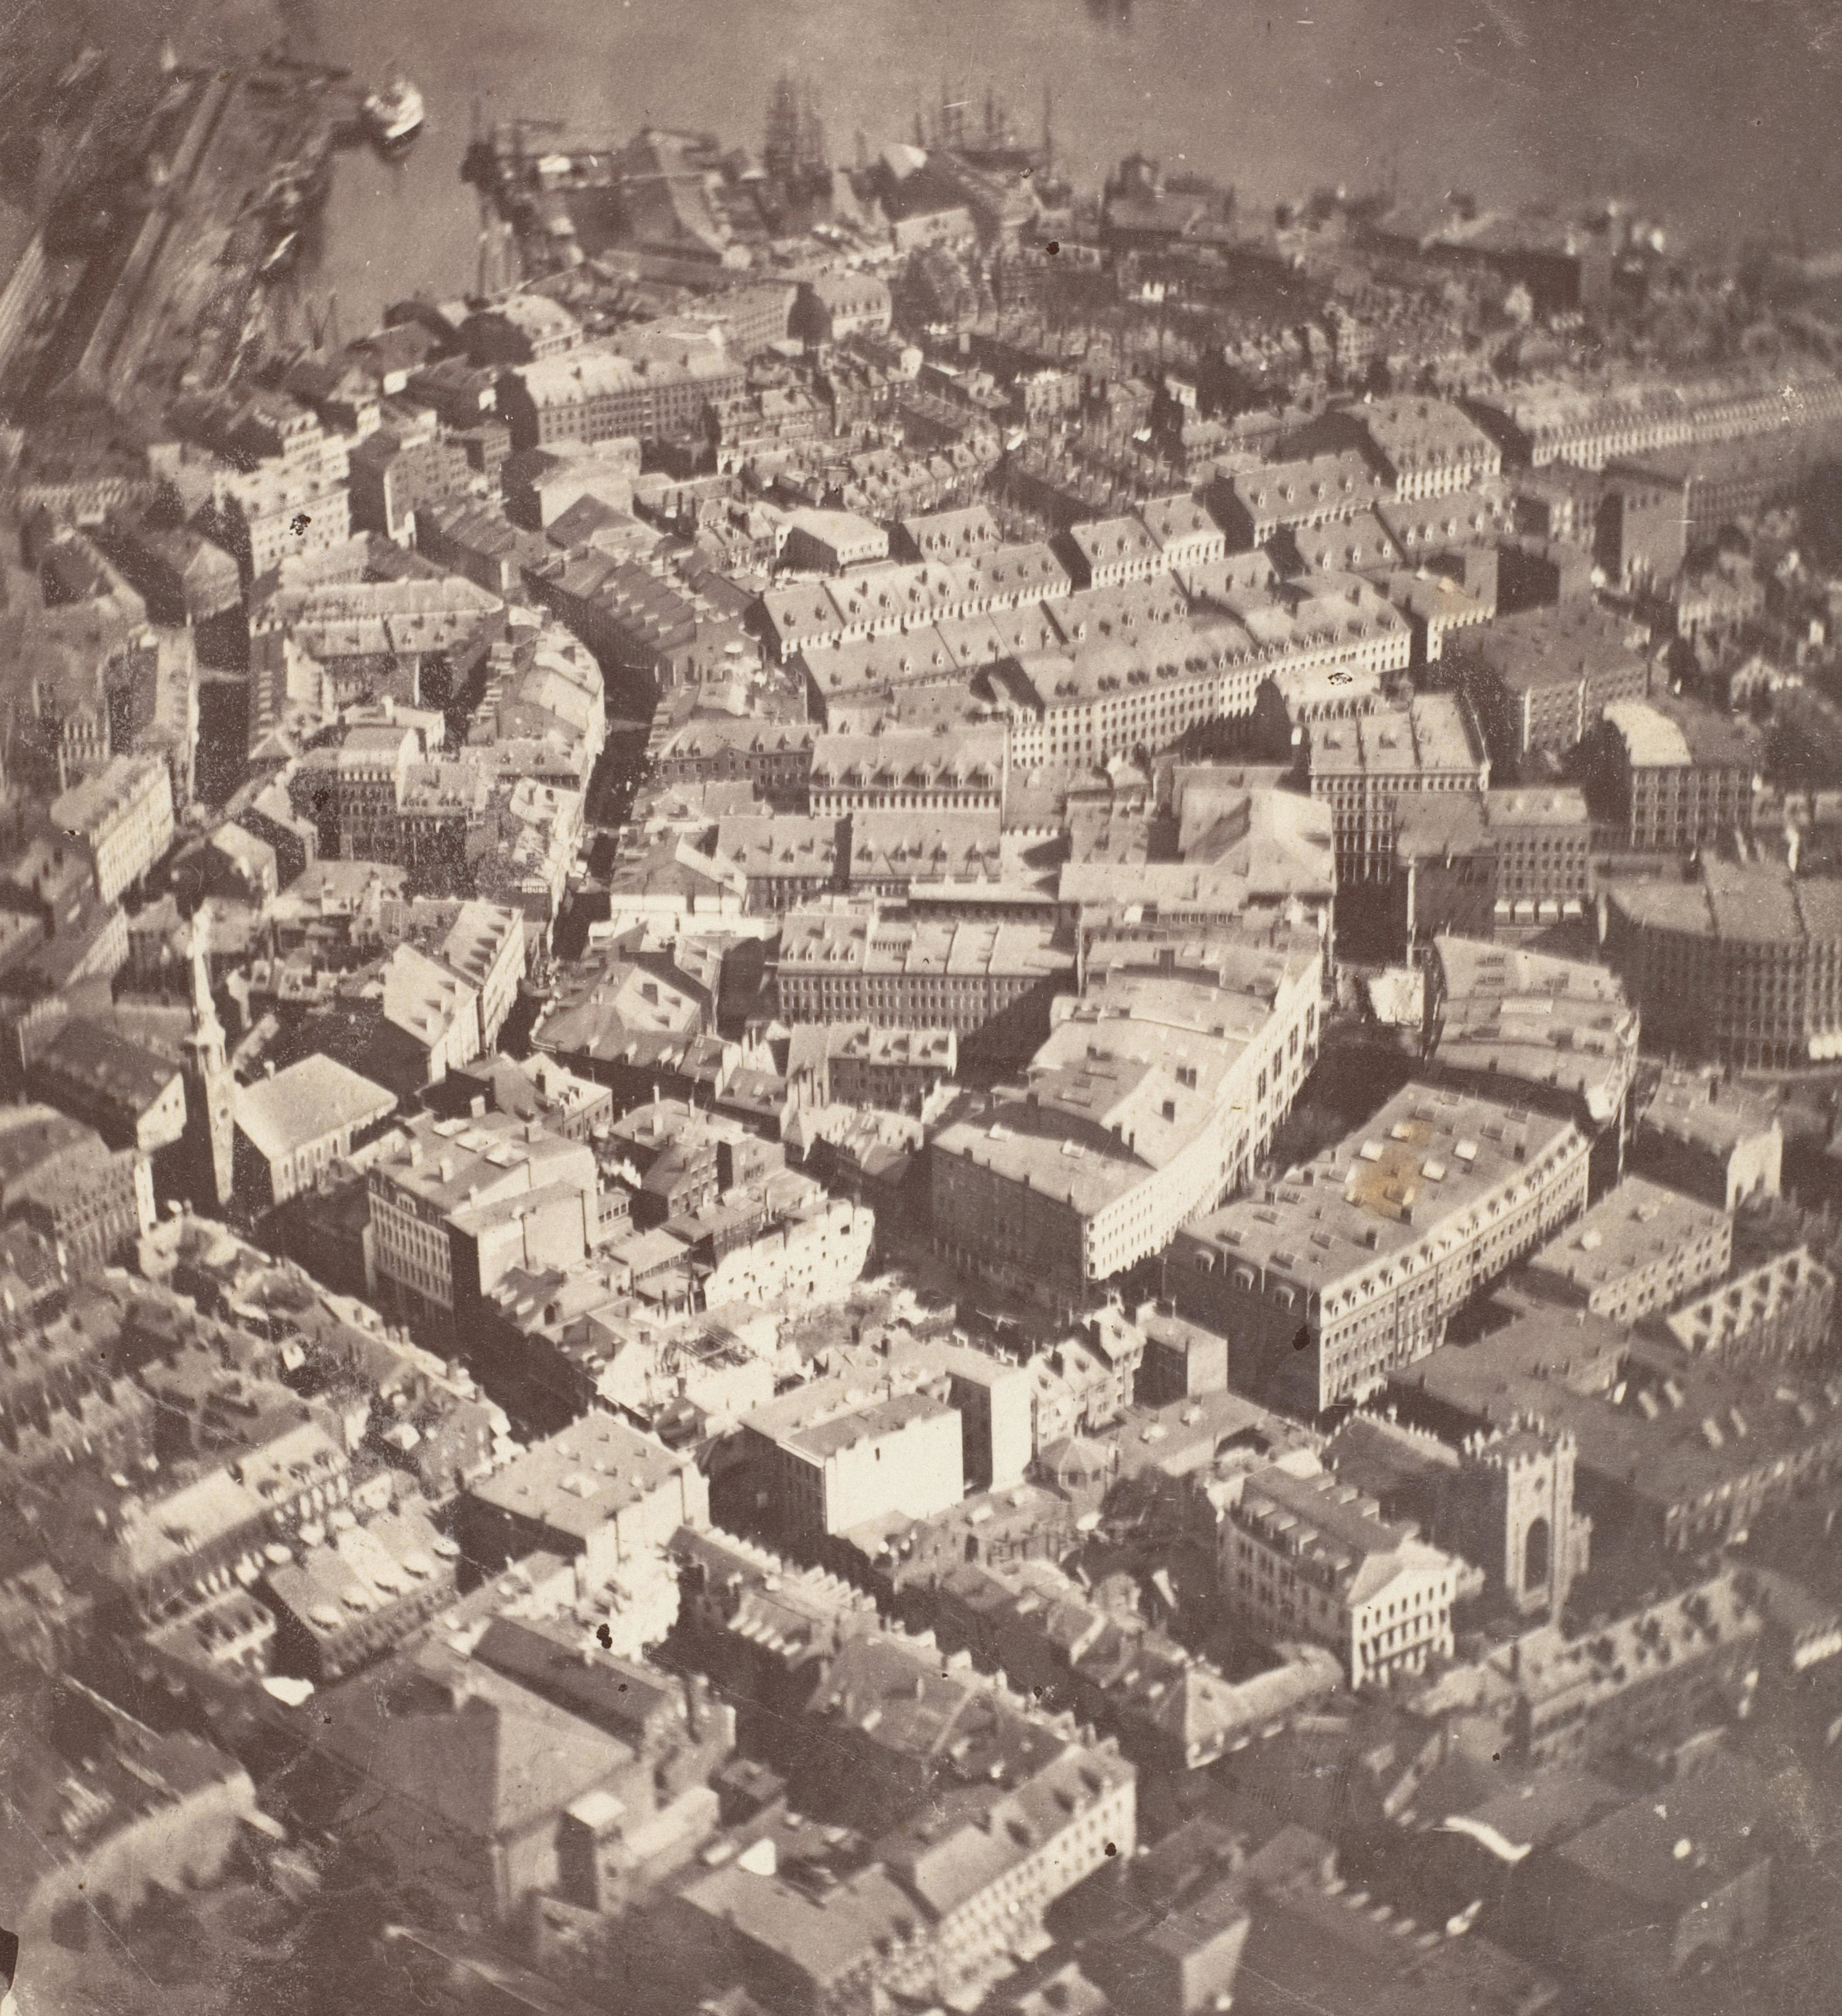 Overhead shot of many low-rise buildings